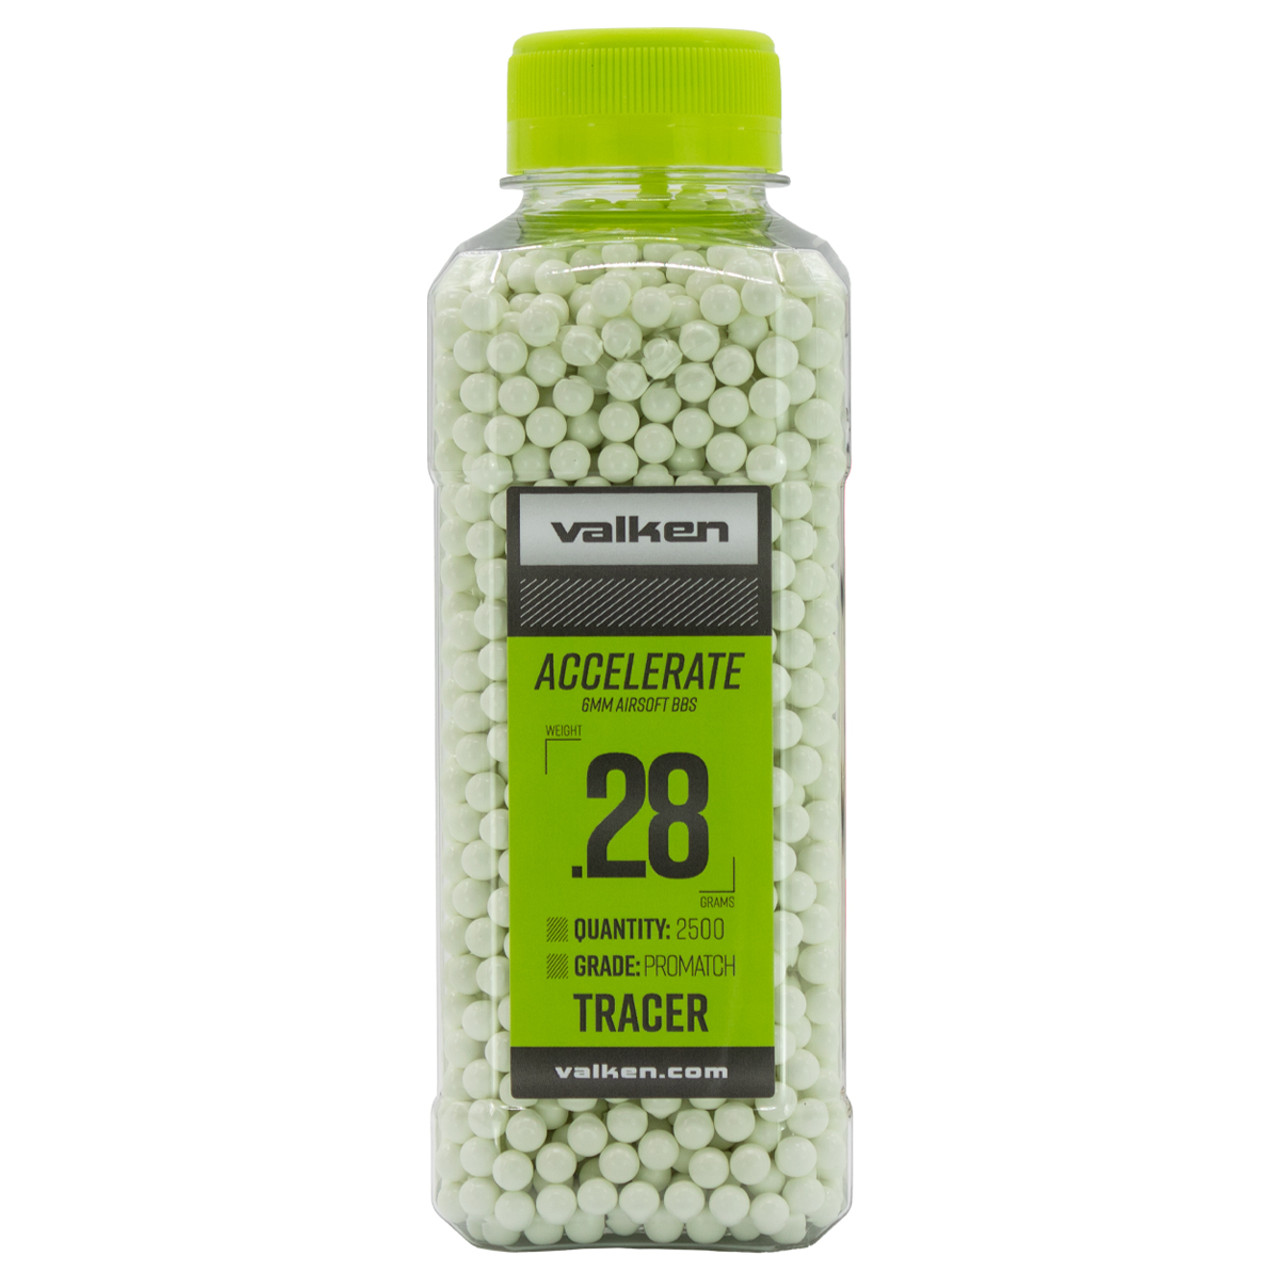 Accelerate Tracer BBs 0.28g - 2500ct